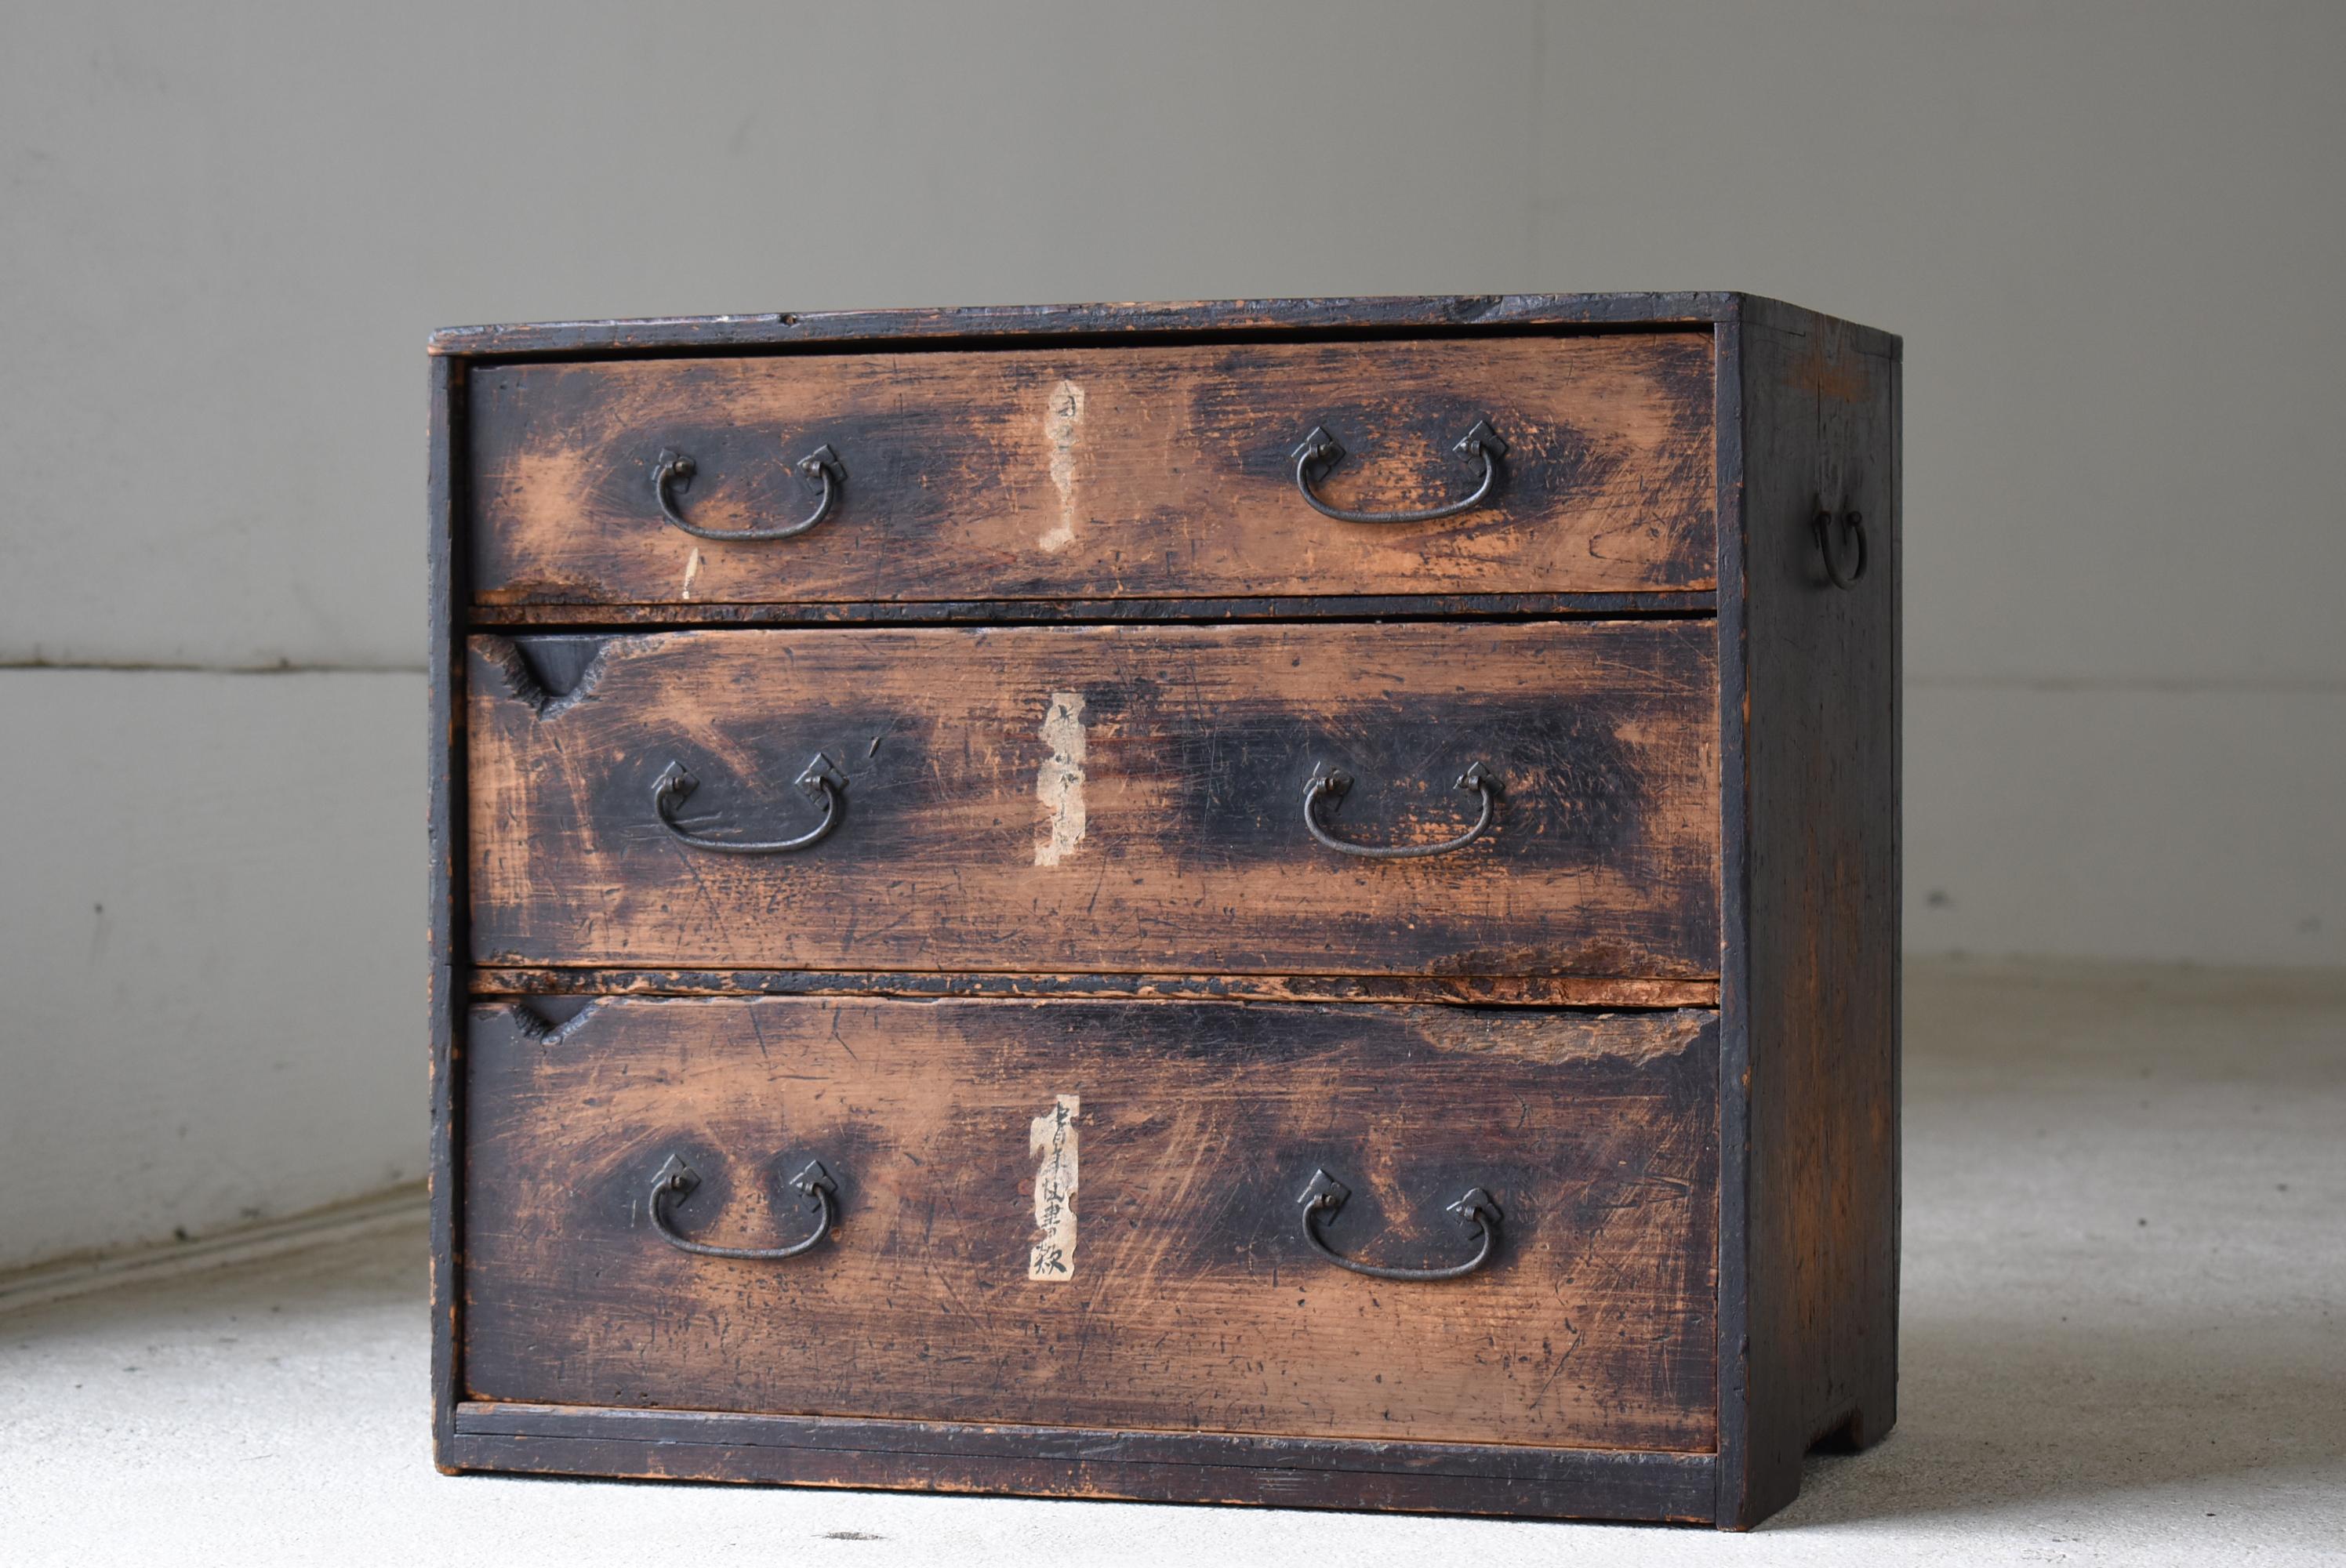 This is a very old Japanese drawer.
It is from the Meiji period (1860s-1900s).
It is mainly made of cedar wood.

It has a simple design with no waste.
It is a very beautiful piece of furniture.
Traces of repairs show that it has been used with